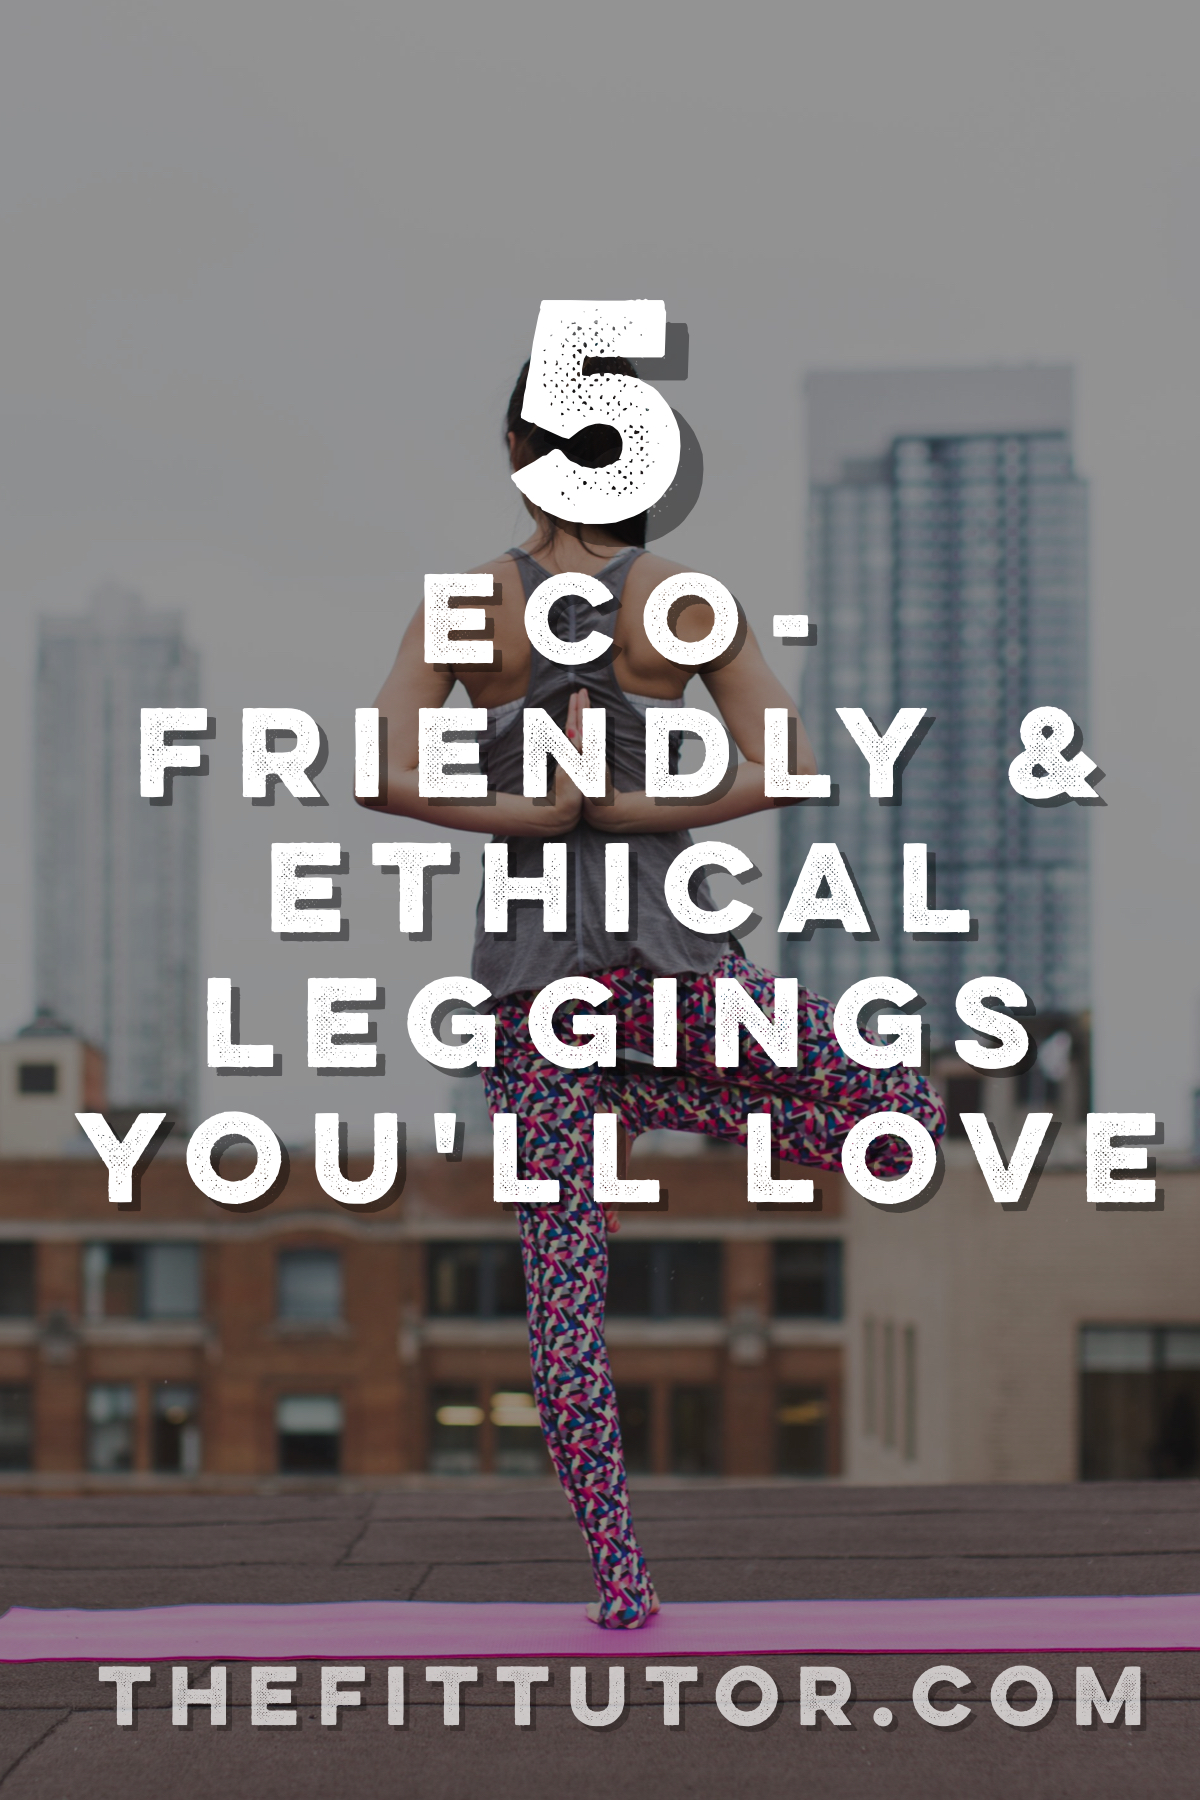 Look good while supporting things you care about- ethical and eco-friendly leggings that every woman should own!